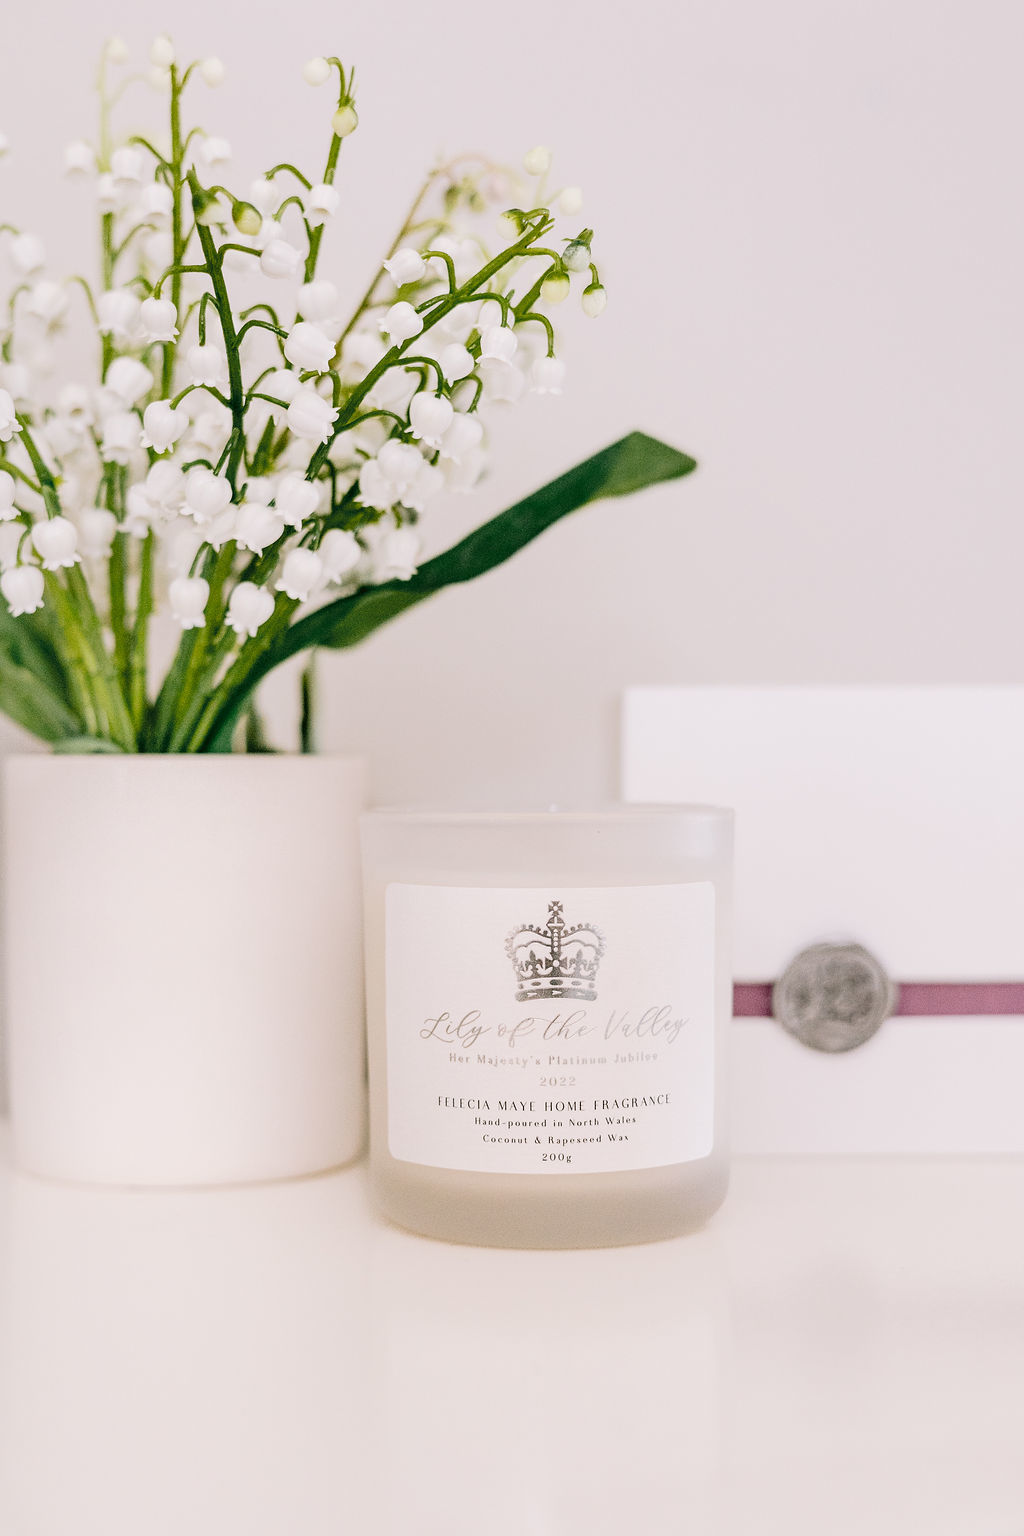 Felecia Maye Home Fragrances Lily of the Valley candle in honour of the Queens Platinum Jubilee.